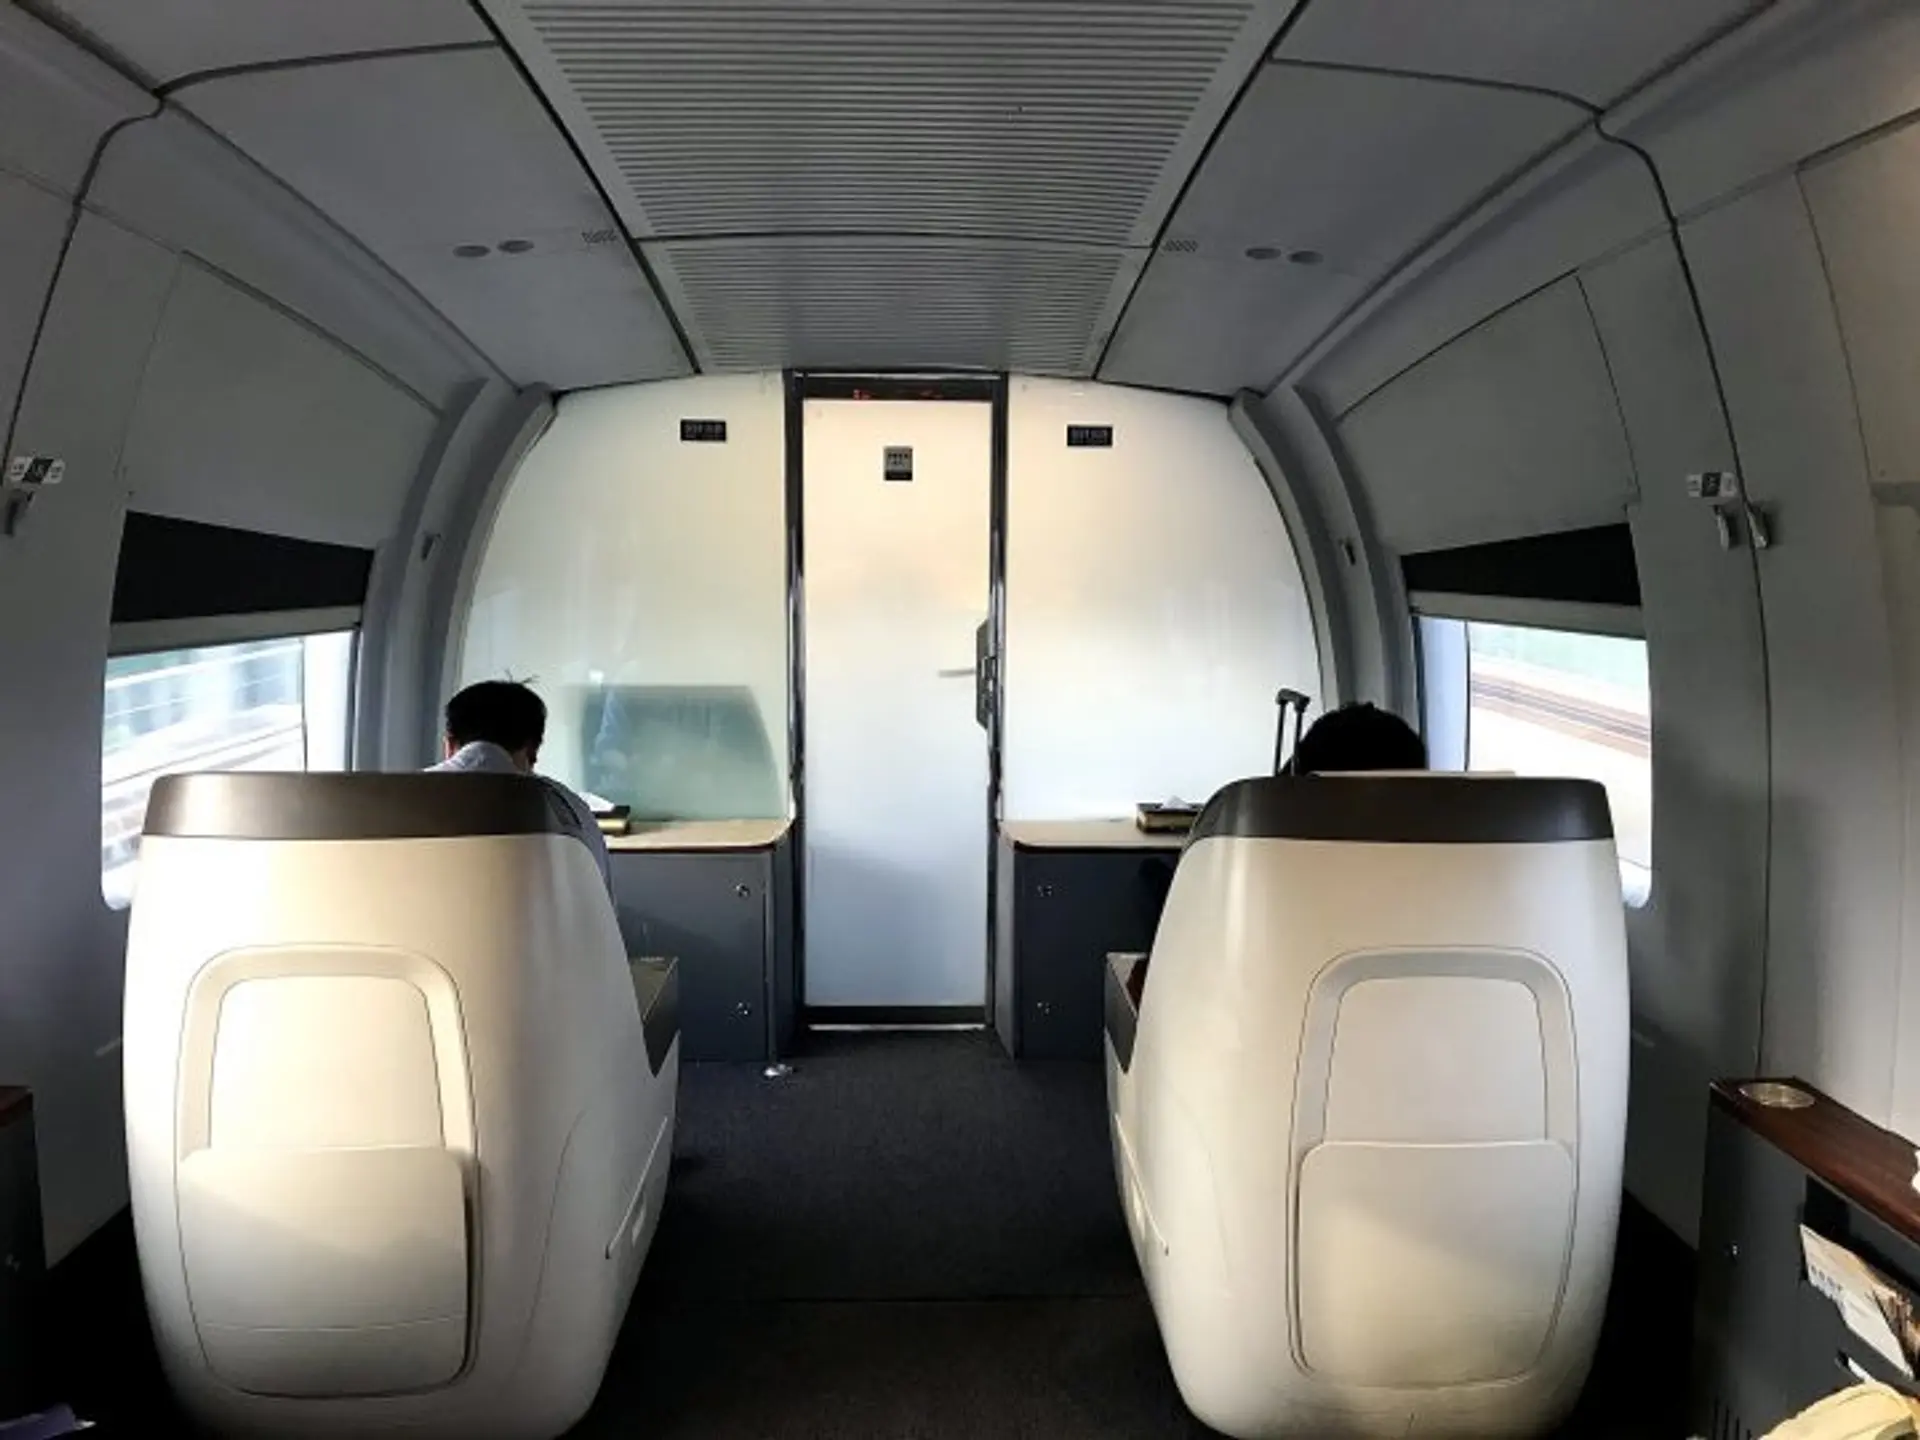 Trains Reviews - Business Class on a high-speed train in China